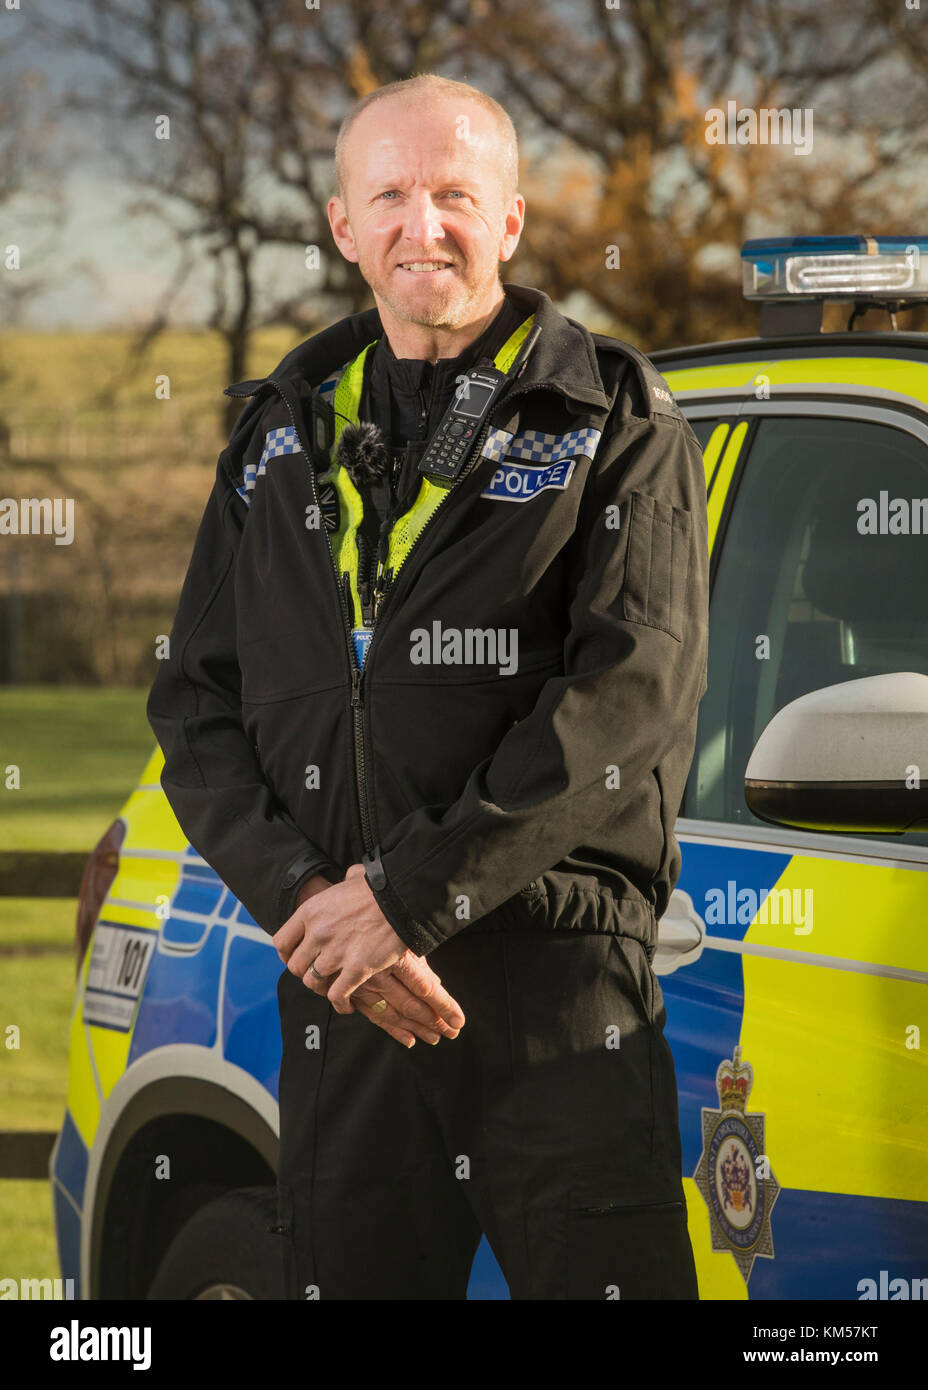 Pc Martin Willis, who clung on to a crashed van to stop it falling from a bridge on Friday morning, during a press call at the West Yorkshire Police Carr Gate operations centre near Wakefield. Stock Photo